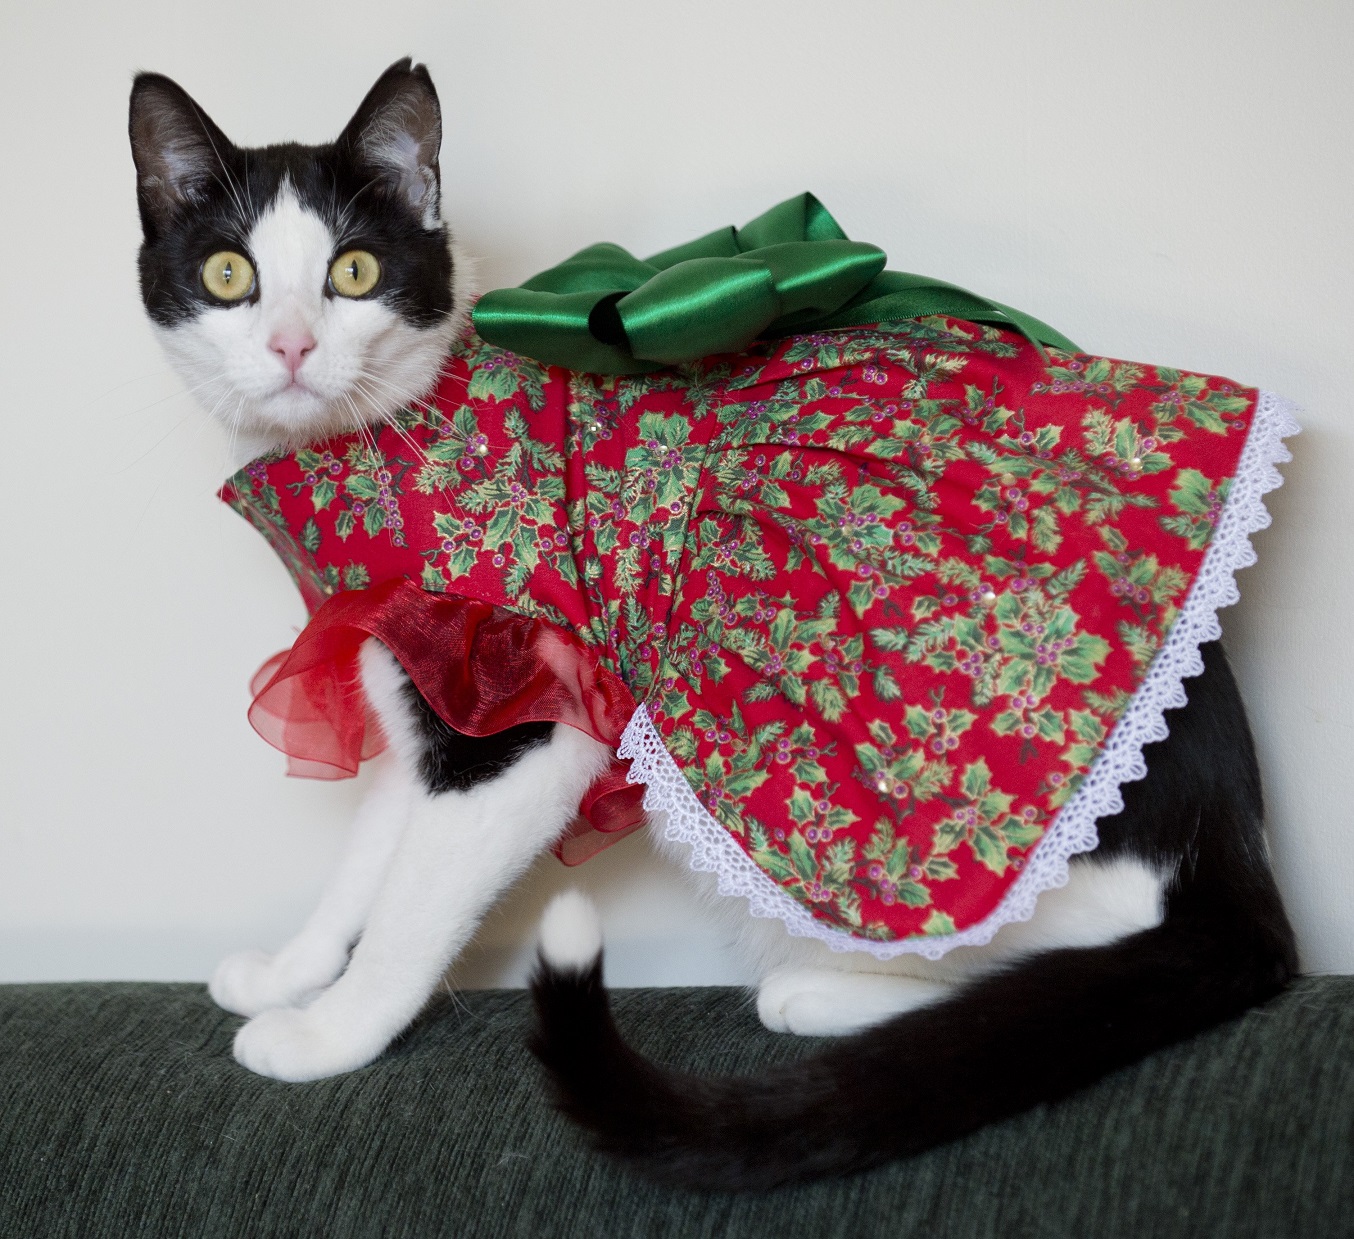 Brie shows off one of her specially designed outfits for the festive season.